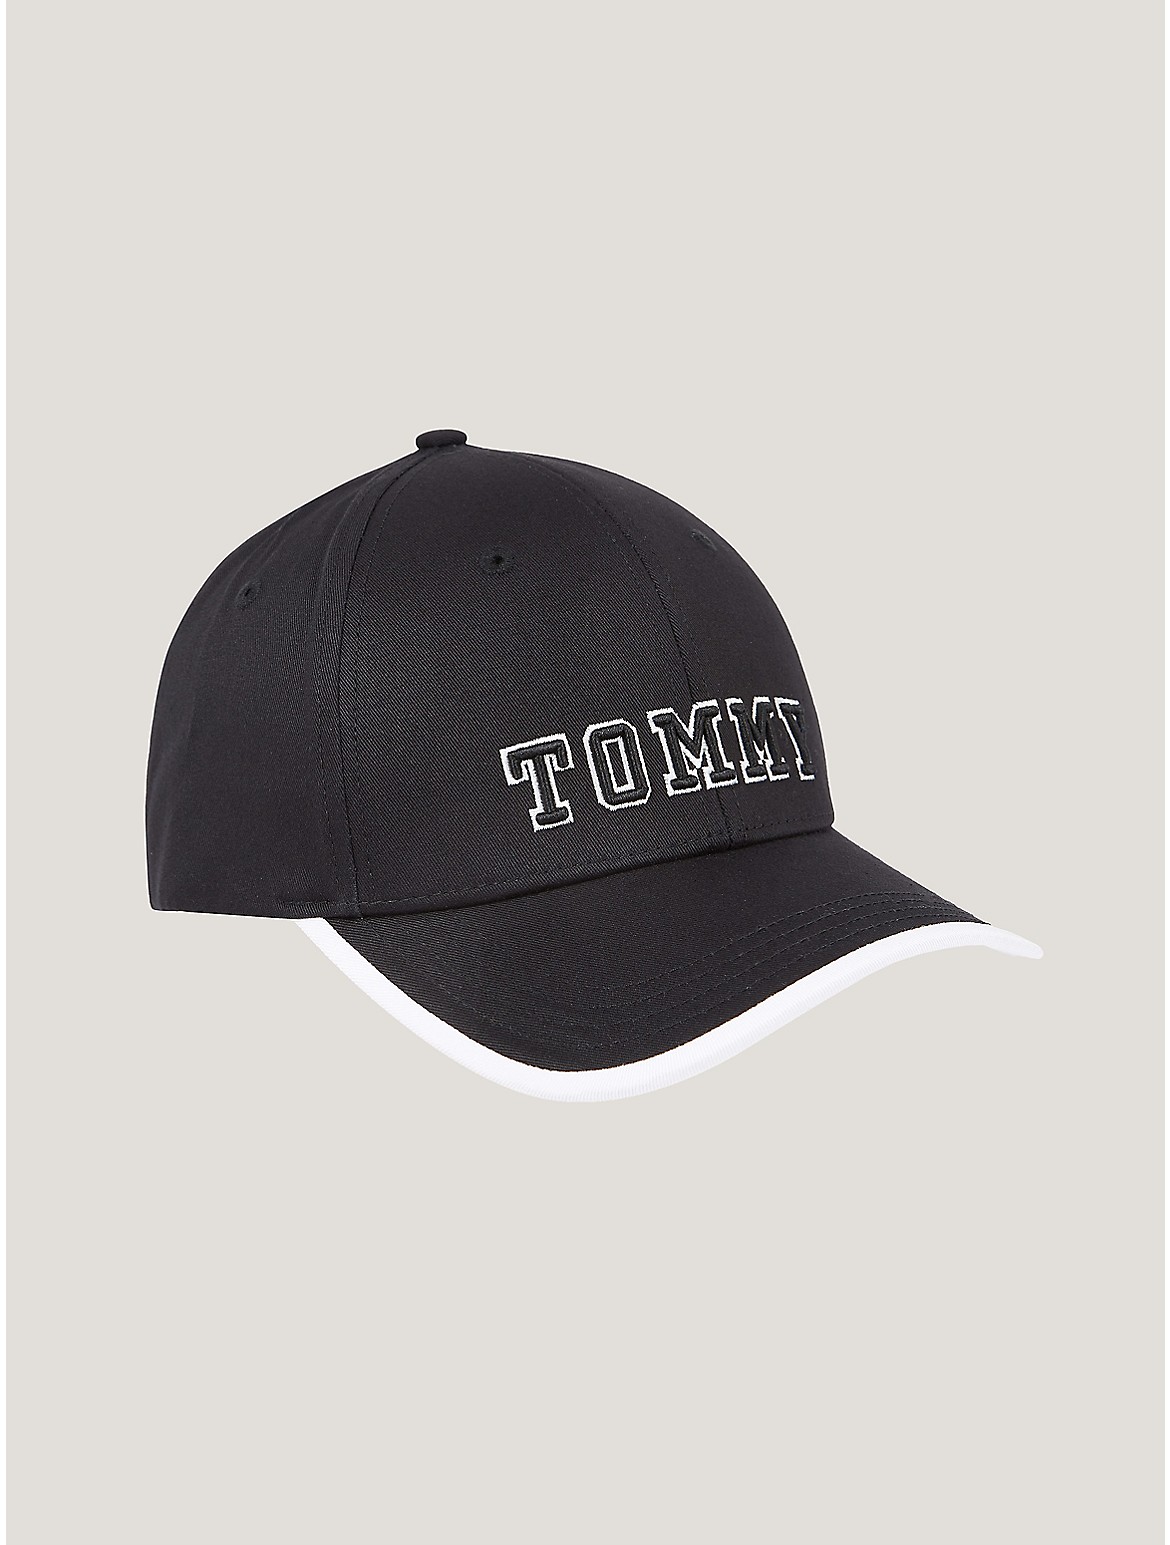 Tommy Hilfiger Men's Archive Embroidered Monotype Logo Cap - Black